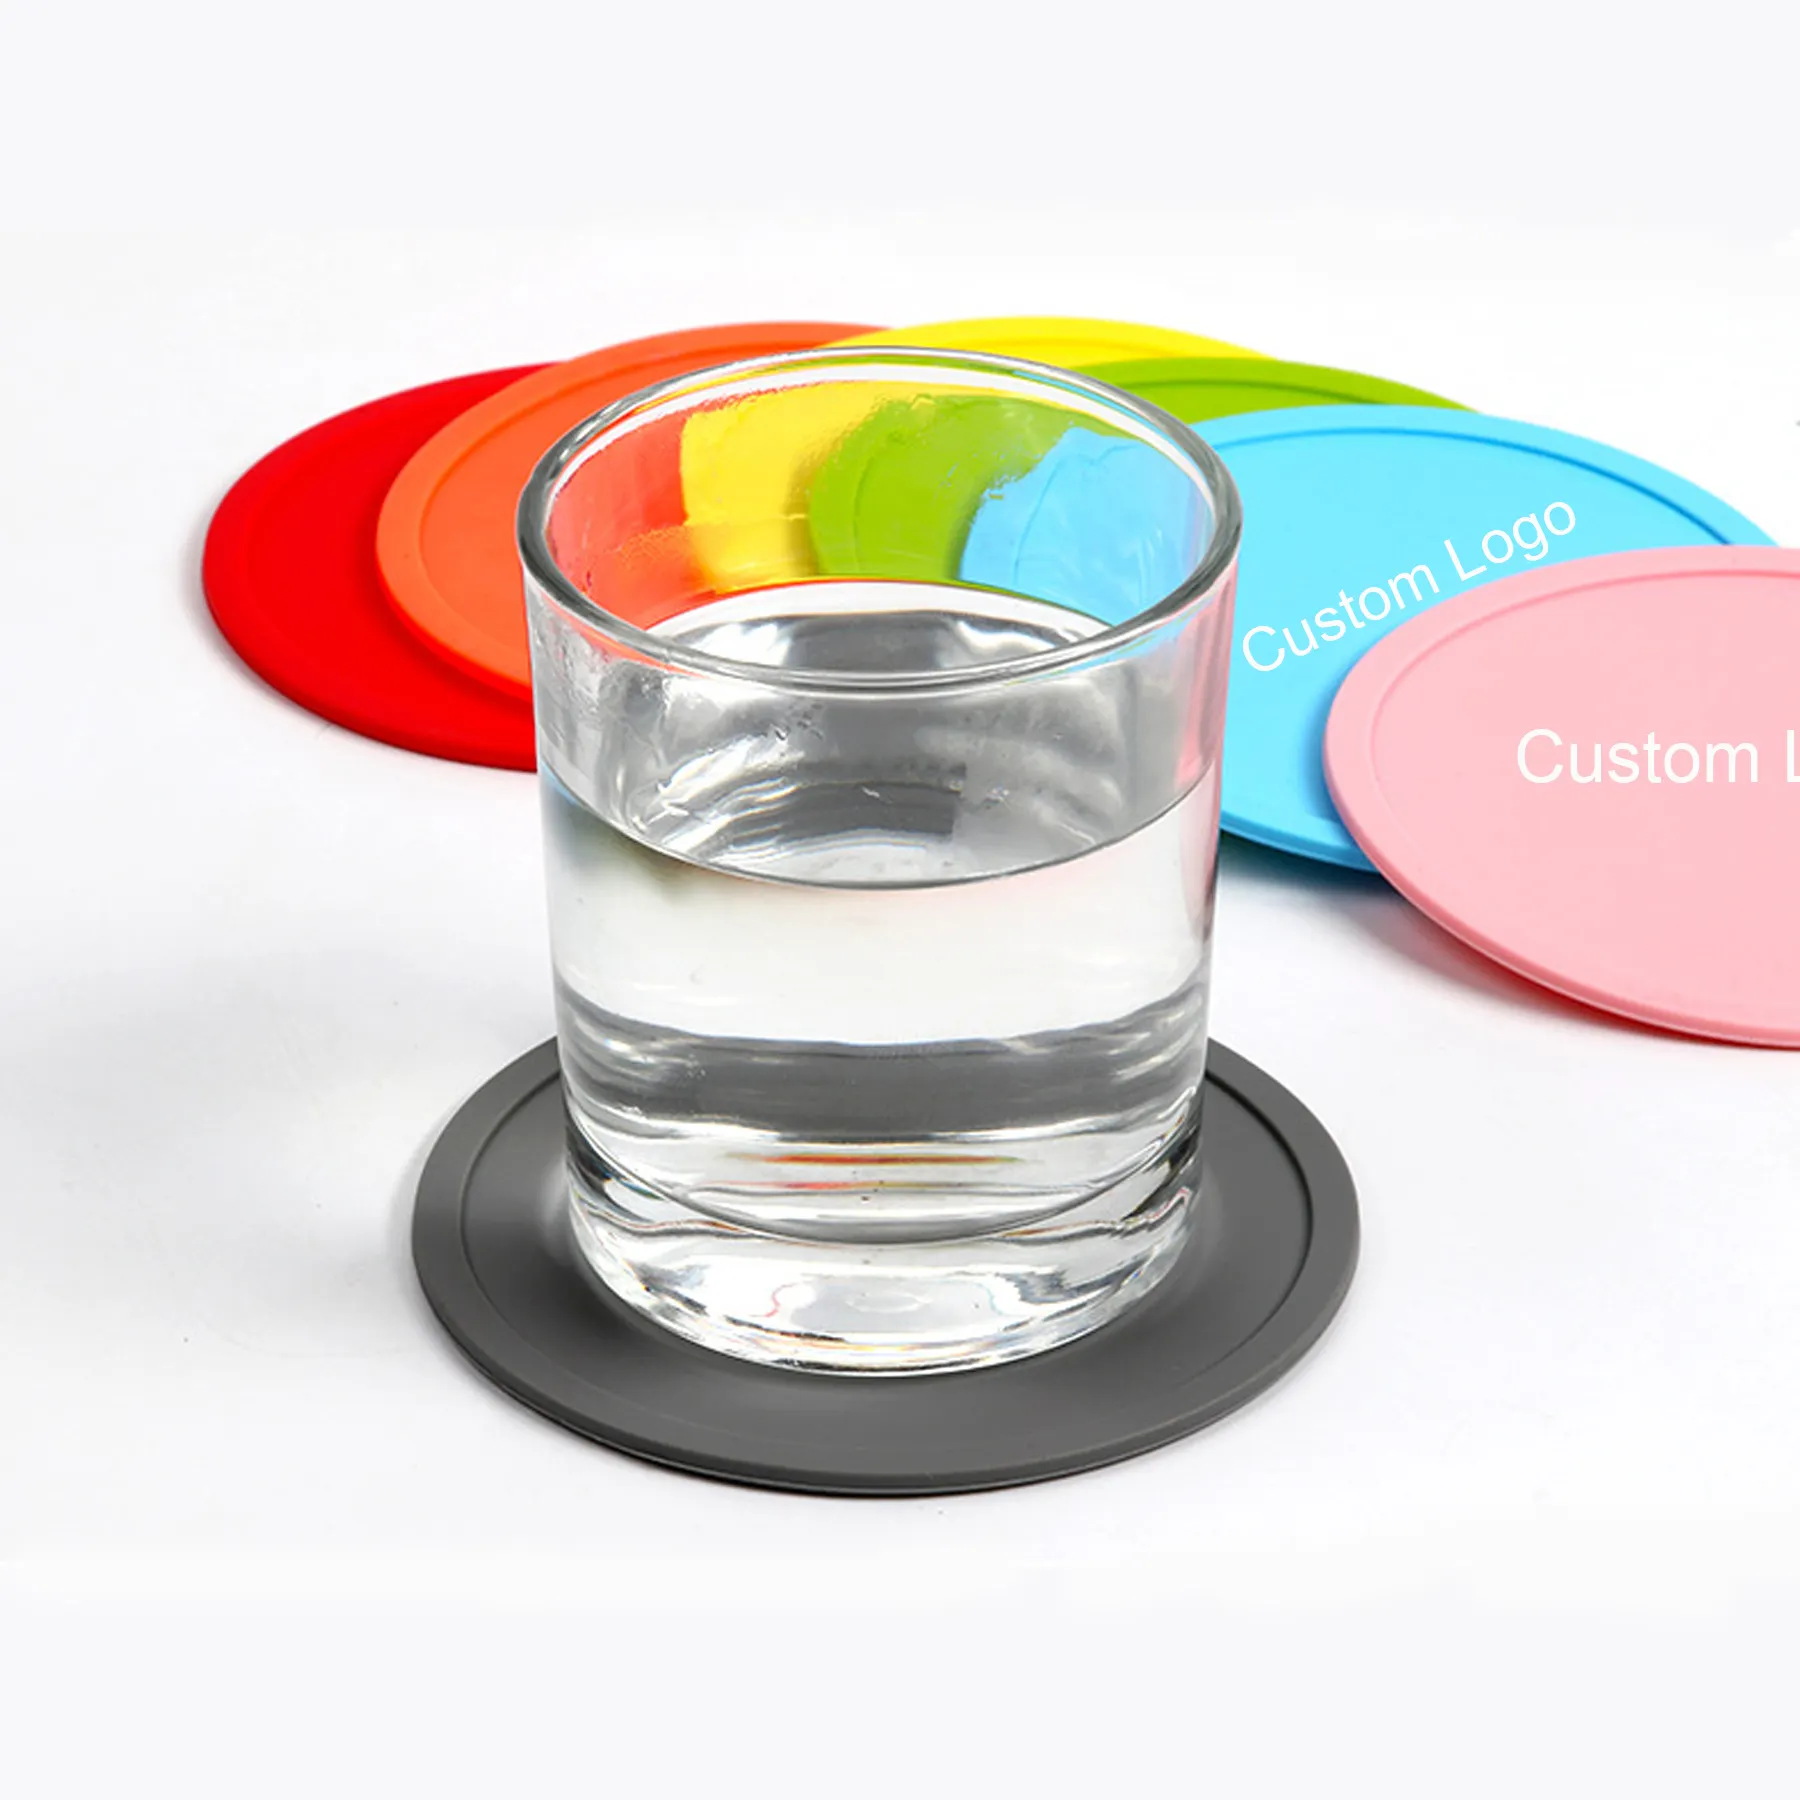 Custom Printed Logo Promotional Round Silicone Coaster For Drink Cup Mat Set Soft Rubber Coaster Bar Beer Custom Coaster Coffee